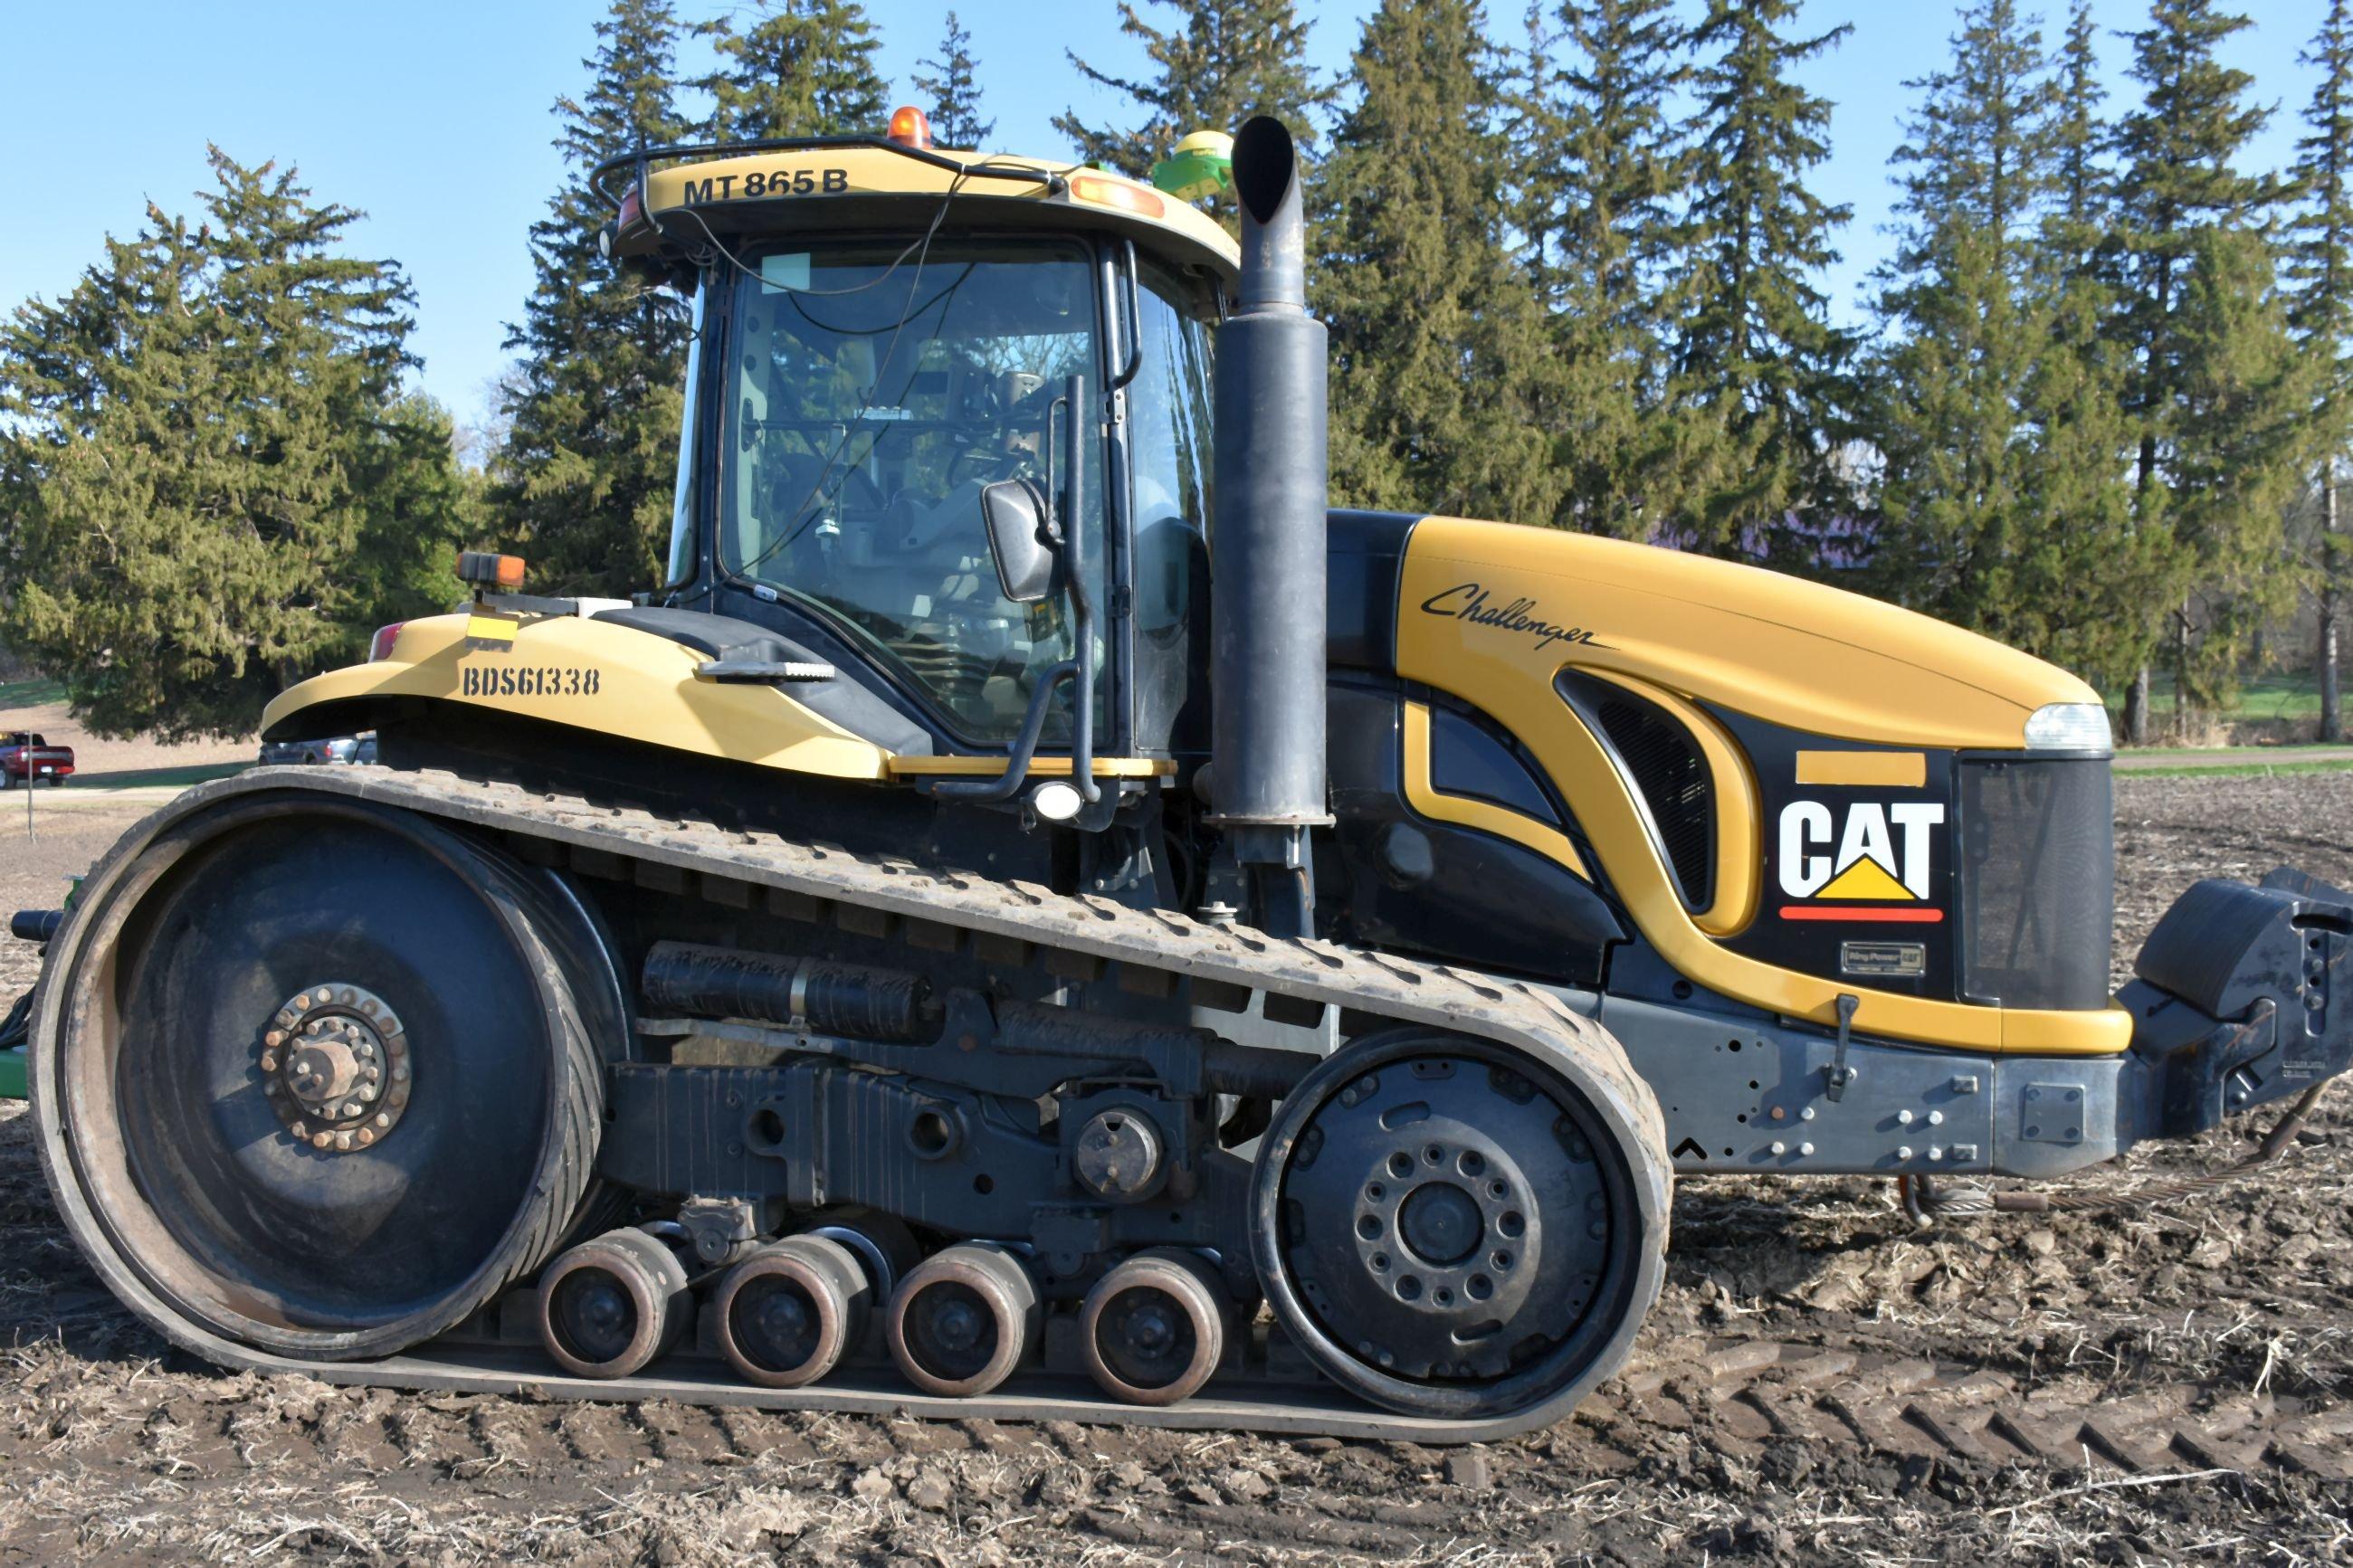 2006 Cat Challenger 865B, 5993 Hours, 30” Track 55%, 5 Hydraulics, Swing Bar, 32 Front Weights, Cat